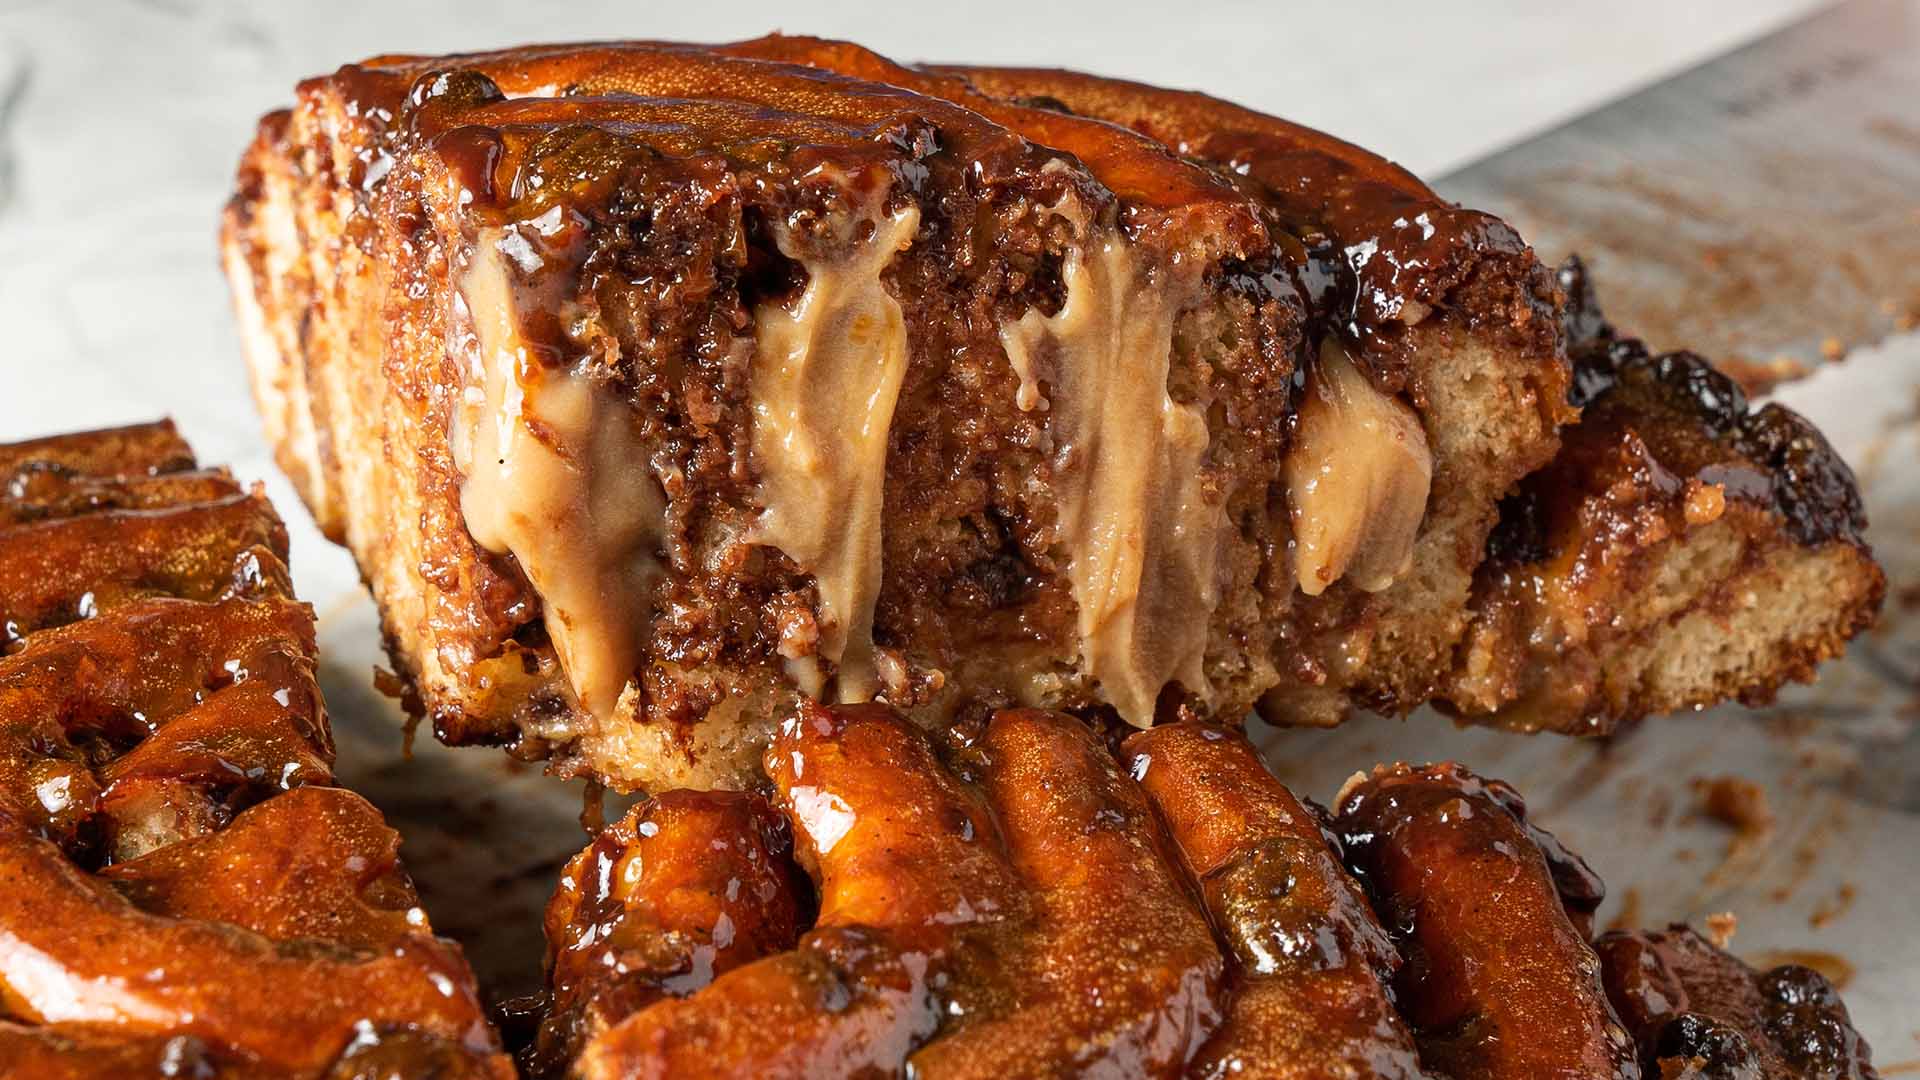 Gelato Messina Is Pairing Super-Sticky Bake-at-Home Caramel Scrolls with Cheesecake Gelato Tubs